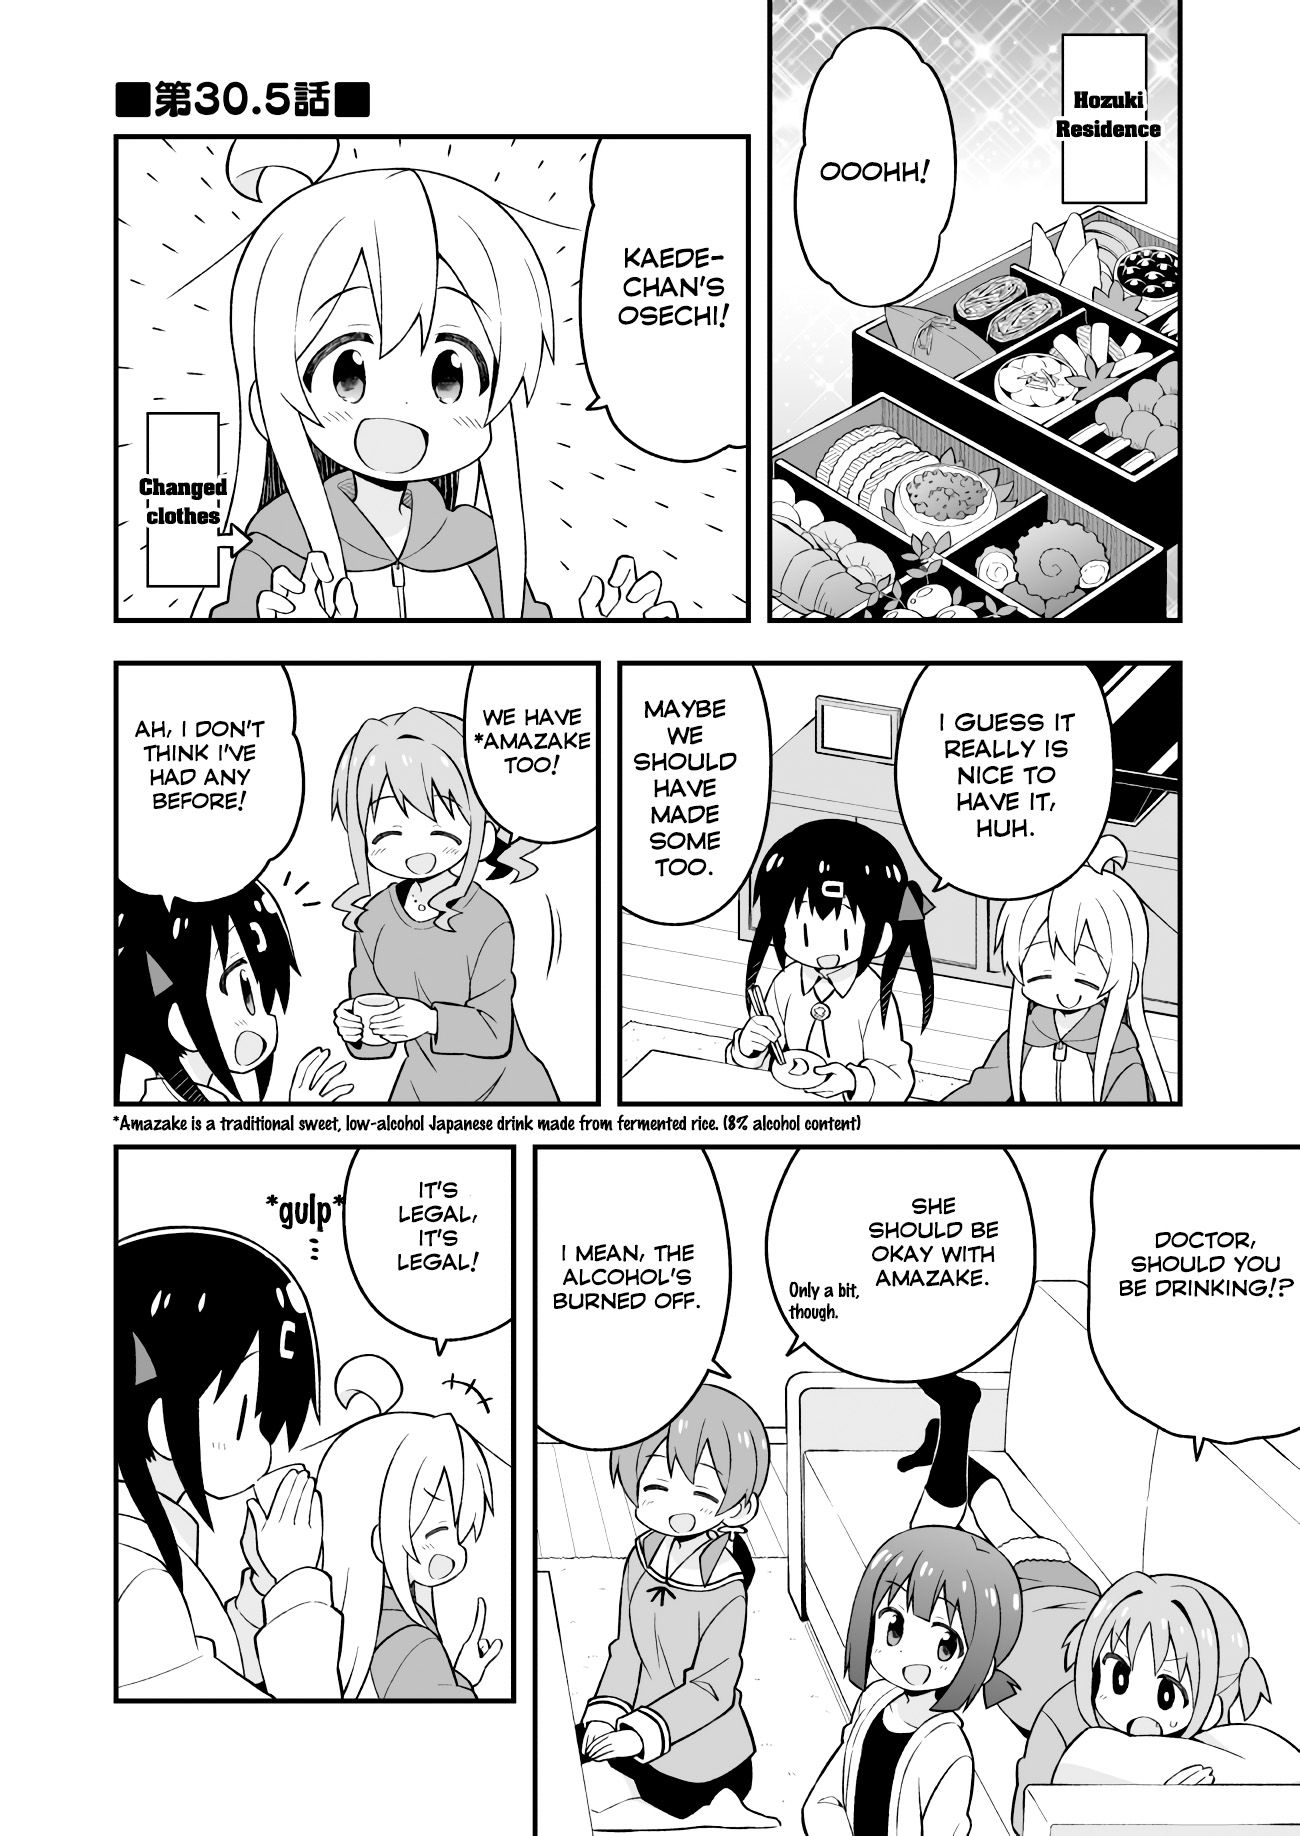 Onii-chan is done for - chapter 30.5 - #1